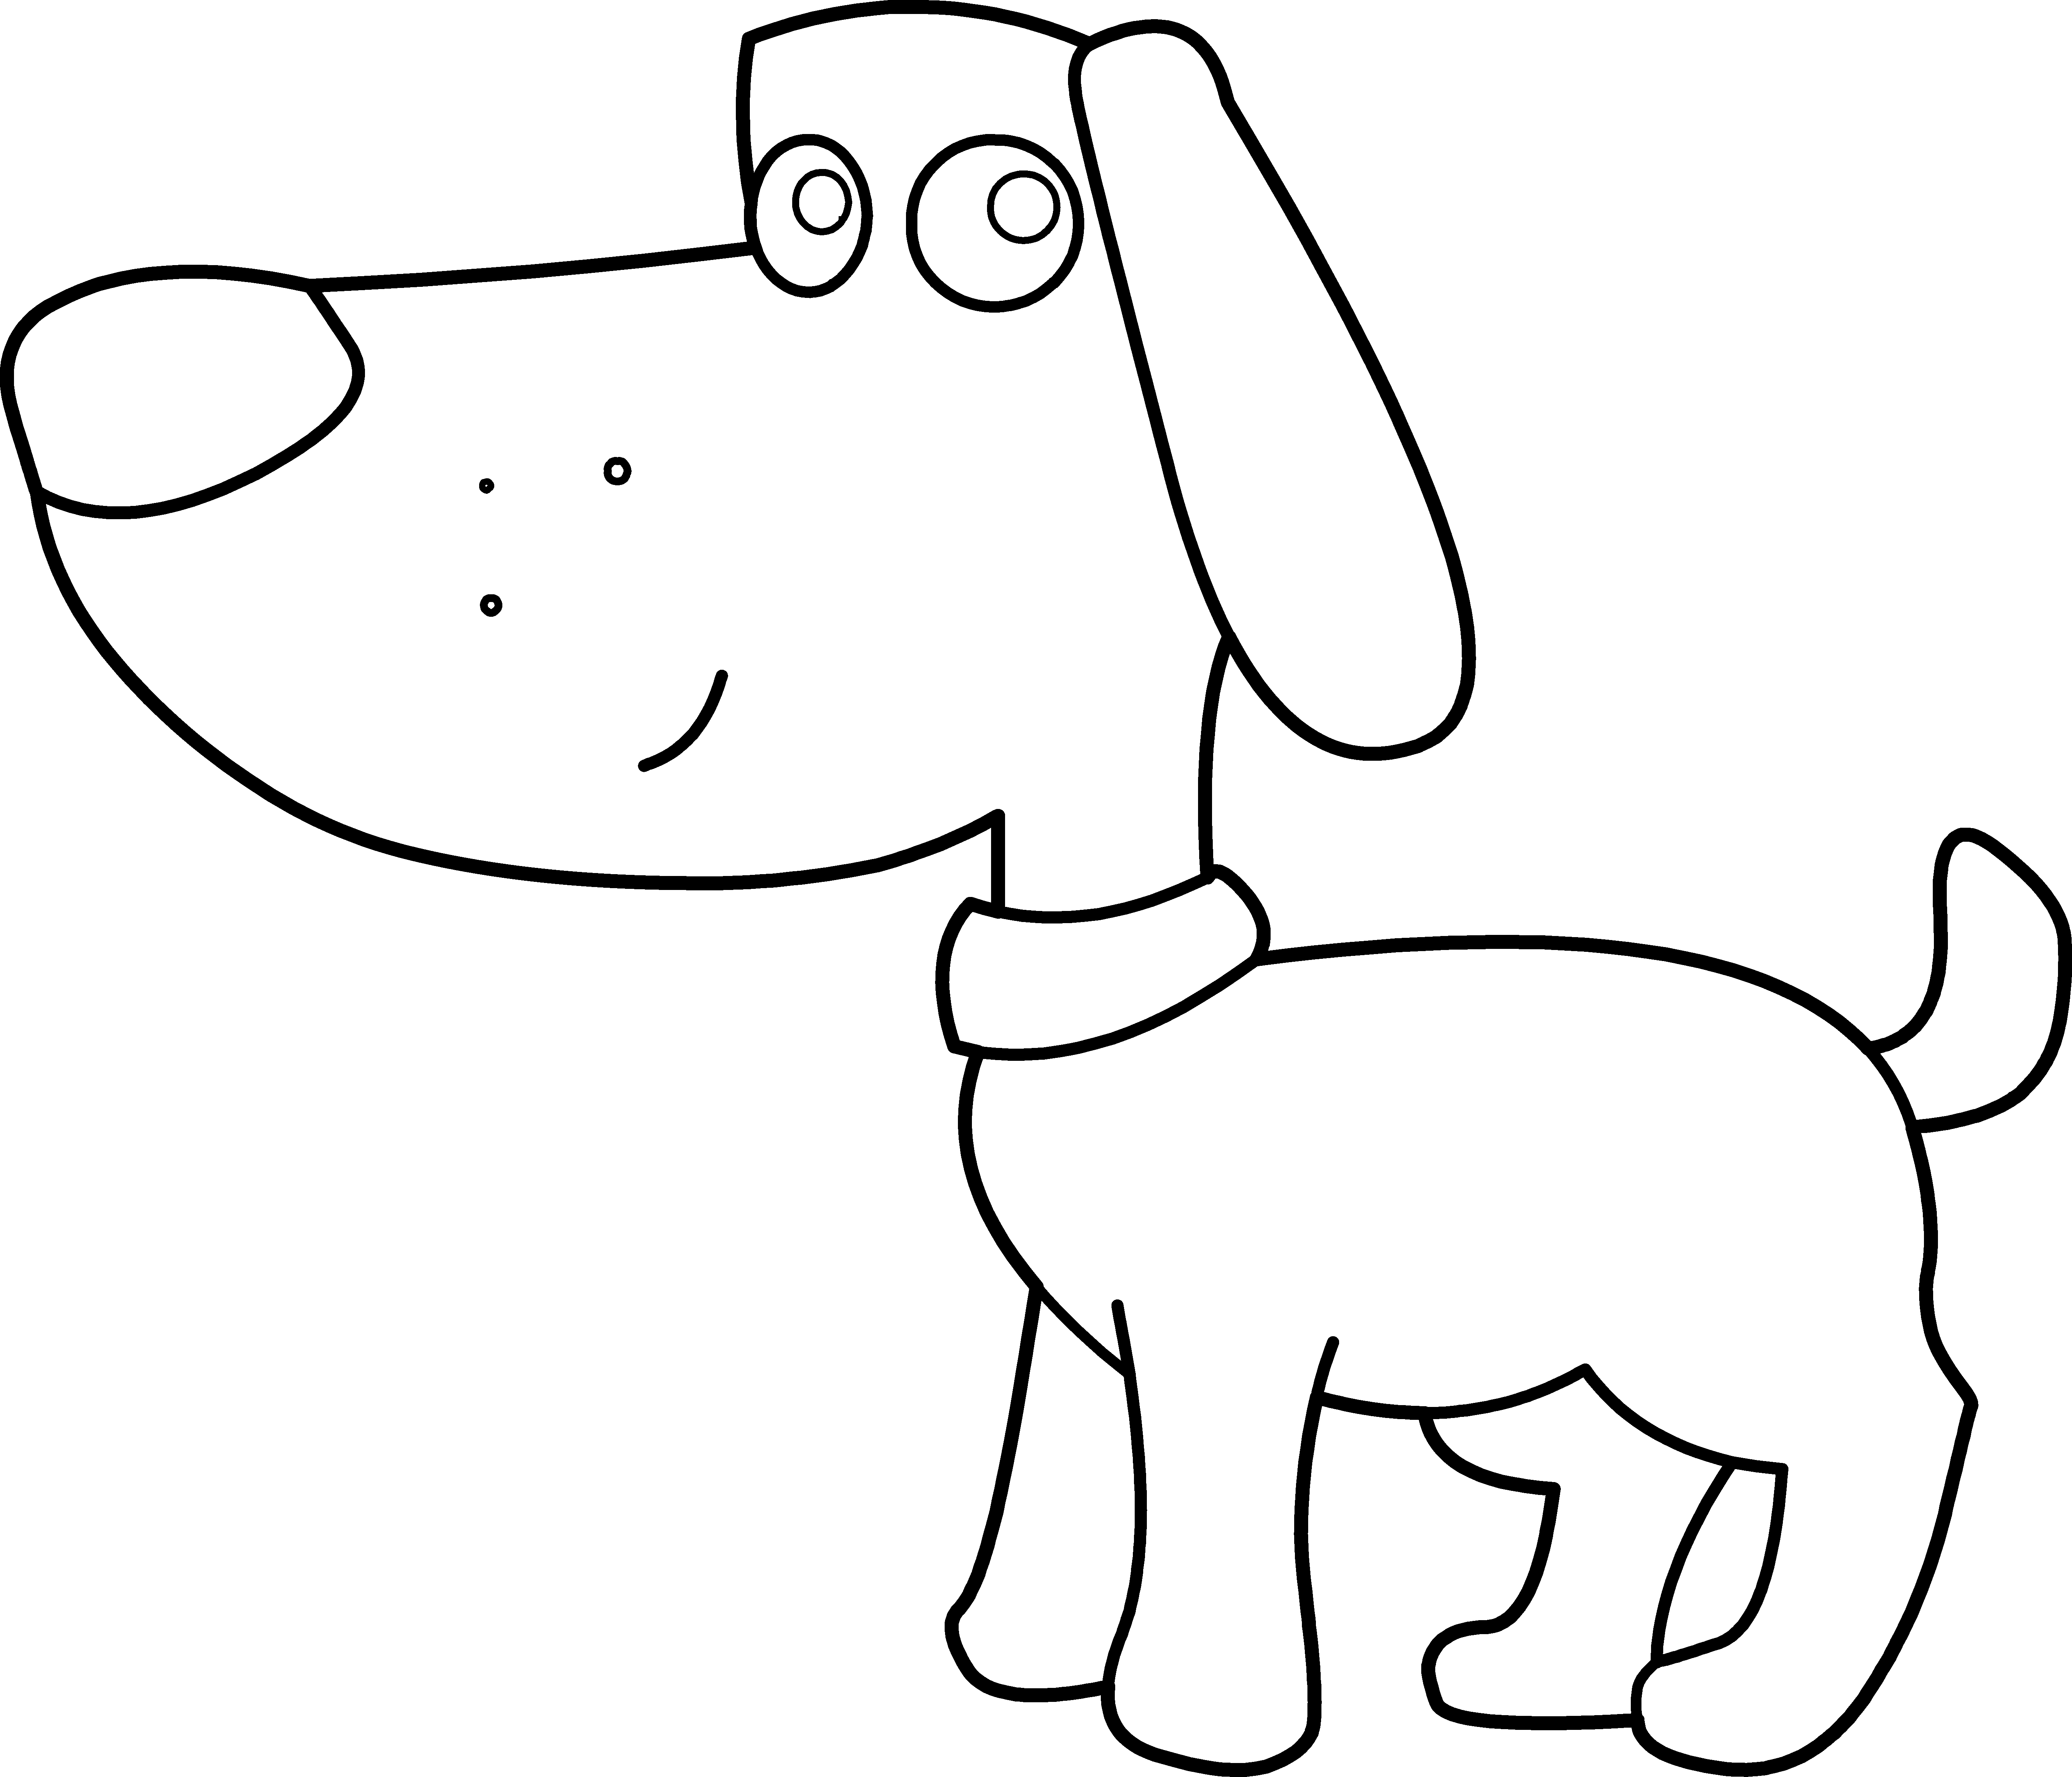 Dog Face Clip Art Black And White | Clipart Panda - Free Clipart ...